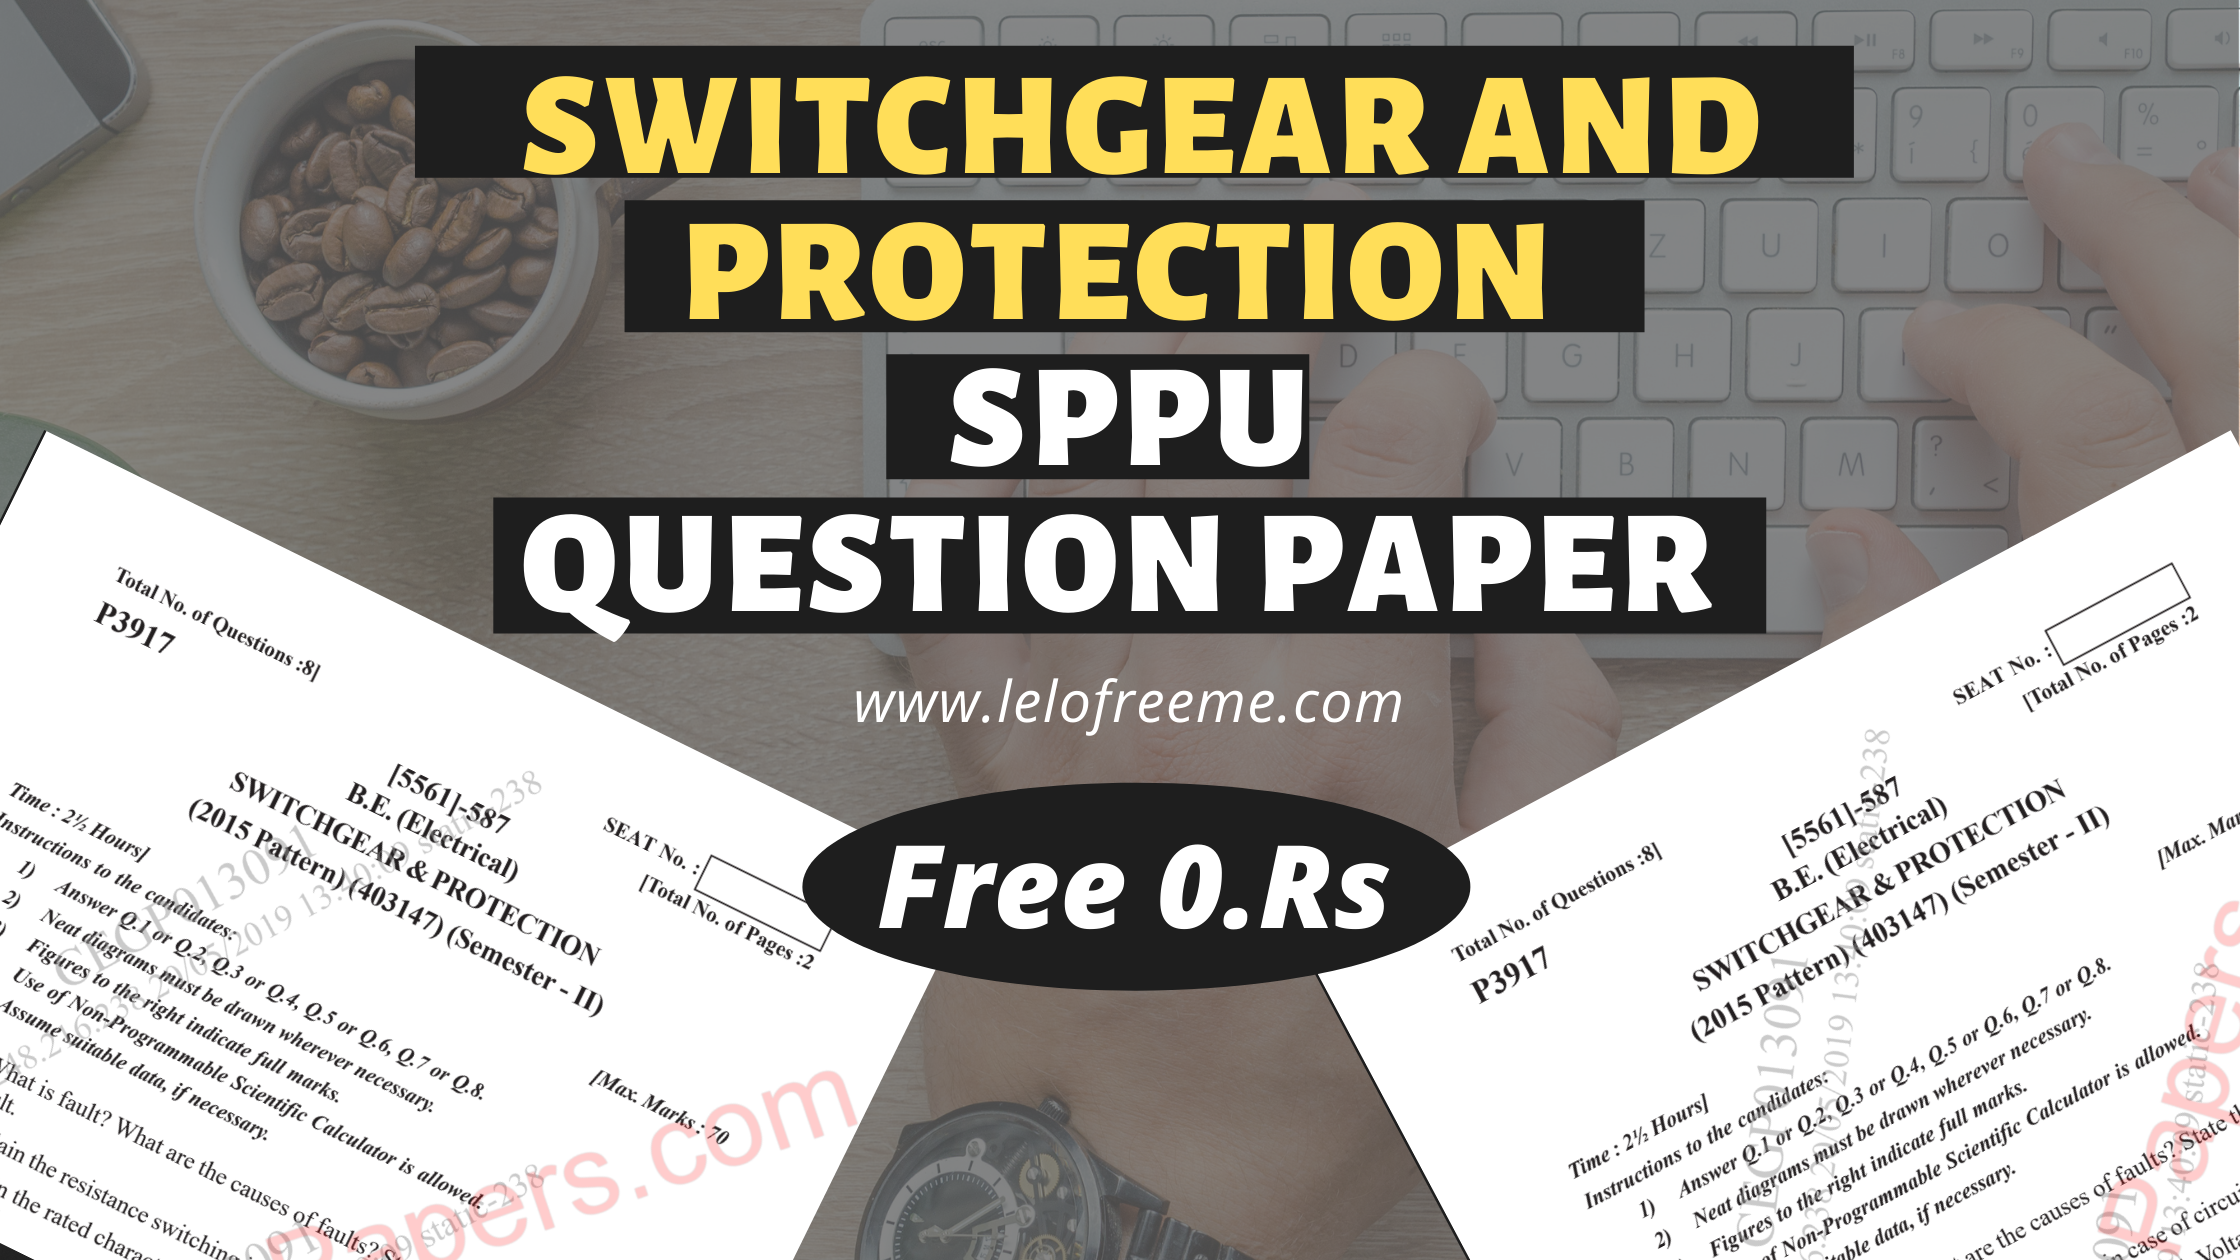 SPPU SWITCHGEAR AND PROTECTION Question Paper (403147)  Download